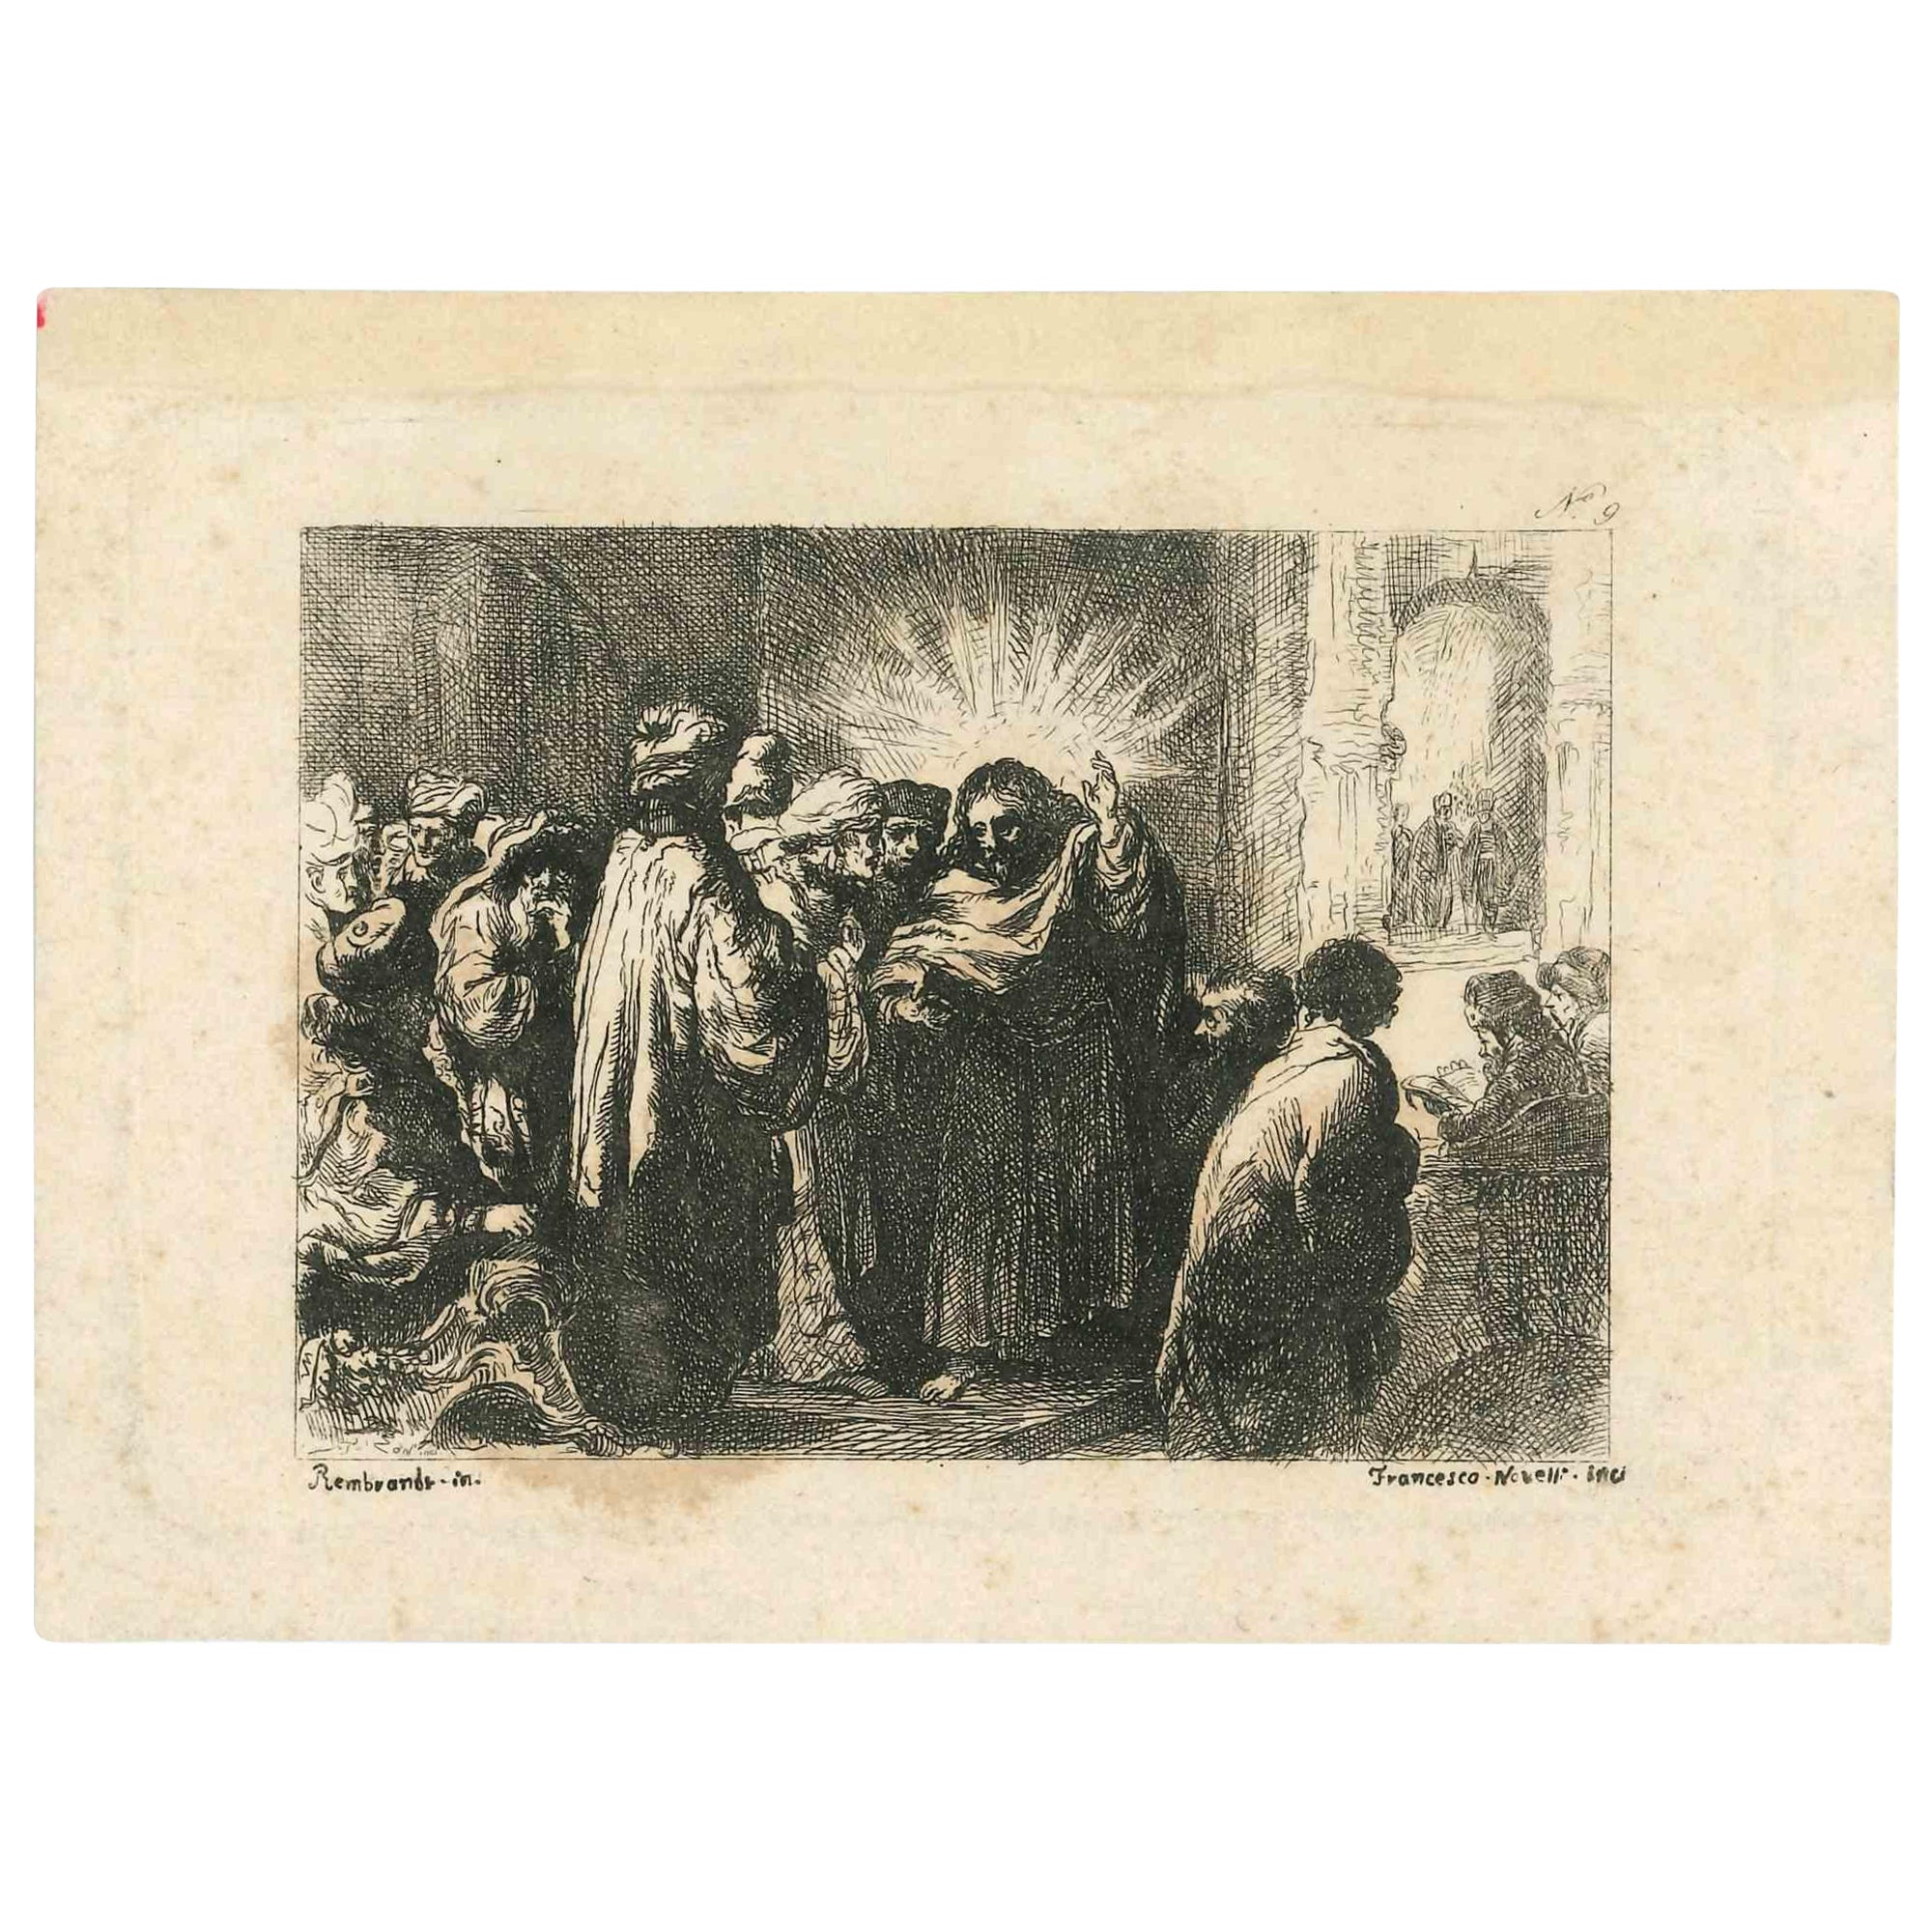 Pastoral Scene After Rembrandt is an original Etching realized in the Early 18th Century by Francesco Novelli (1767-1836).

Signed on the plate.

In good condition. 

The artwork is depicted skillfully through confident and short strokes with